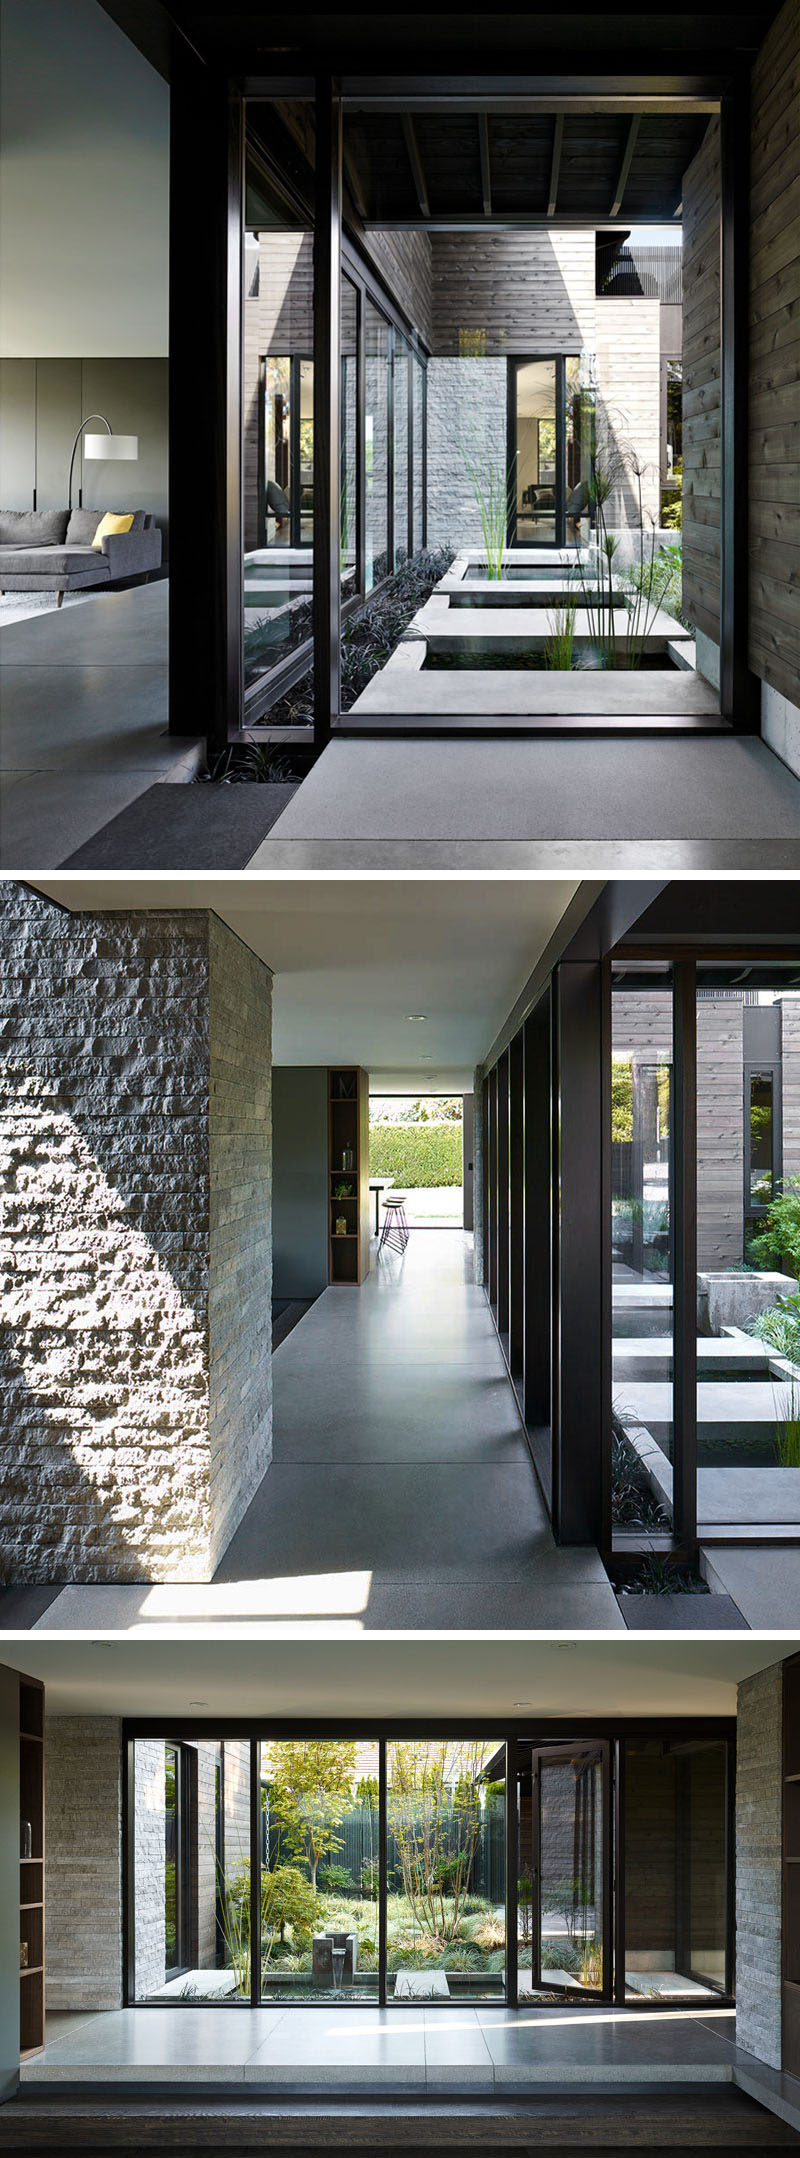 Stepping inside this renovated house, what was once a wall with three slim vertical windows, is now a large open window that provides views of the courtyard from inside the home. Around the corner and hidden in plain sight is a glass door that allows access to the courtyard. #Renovation #Windows #ModernHouse #Courtyard